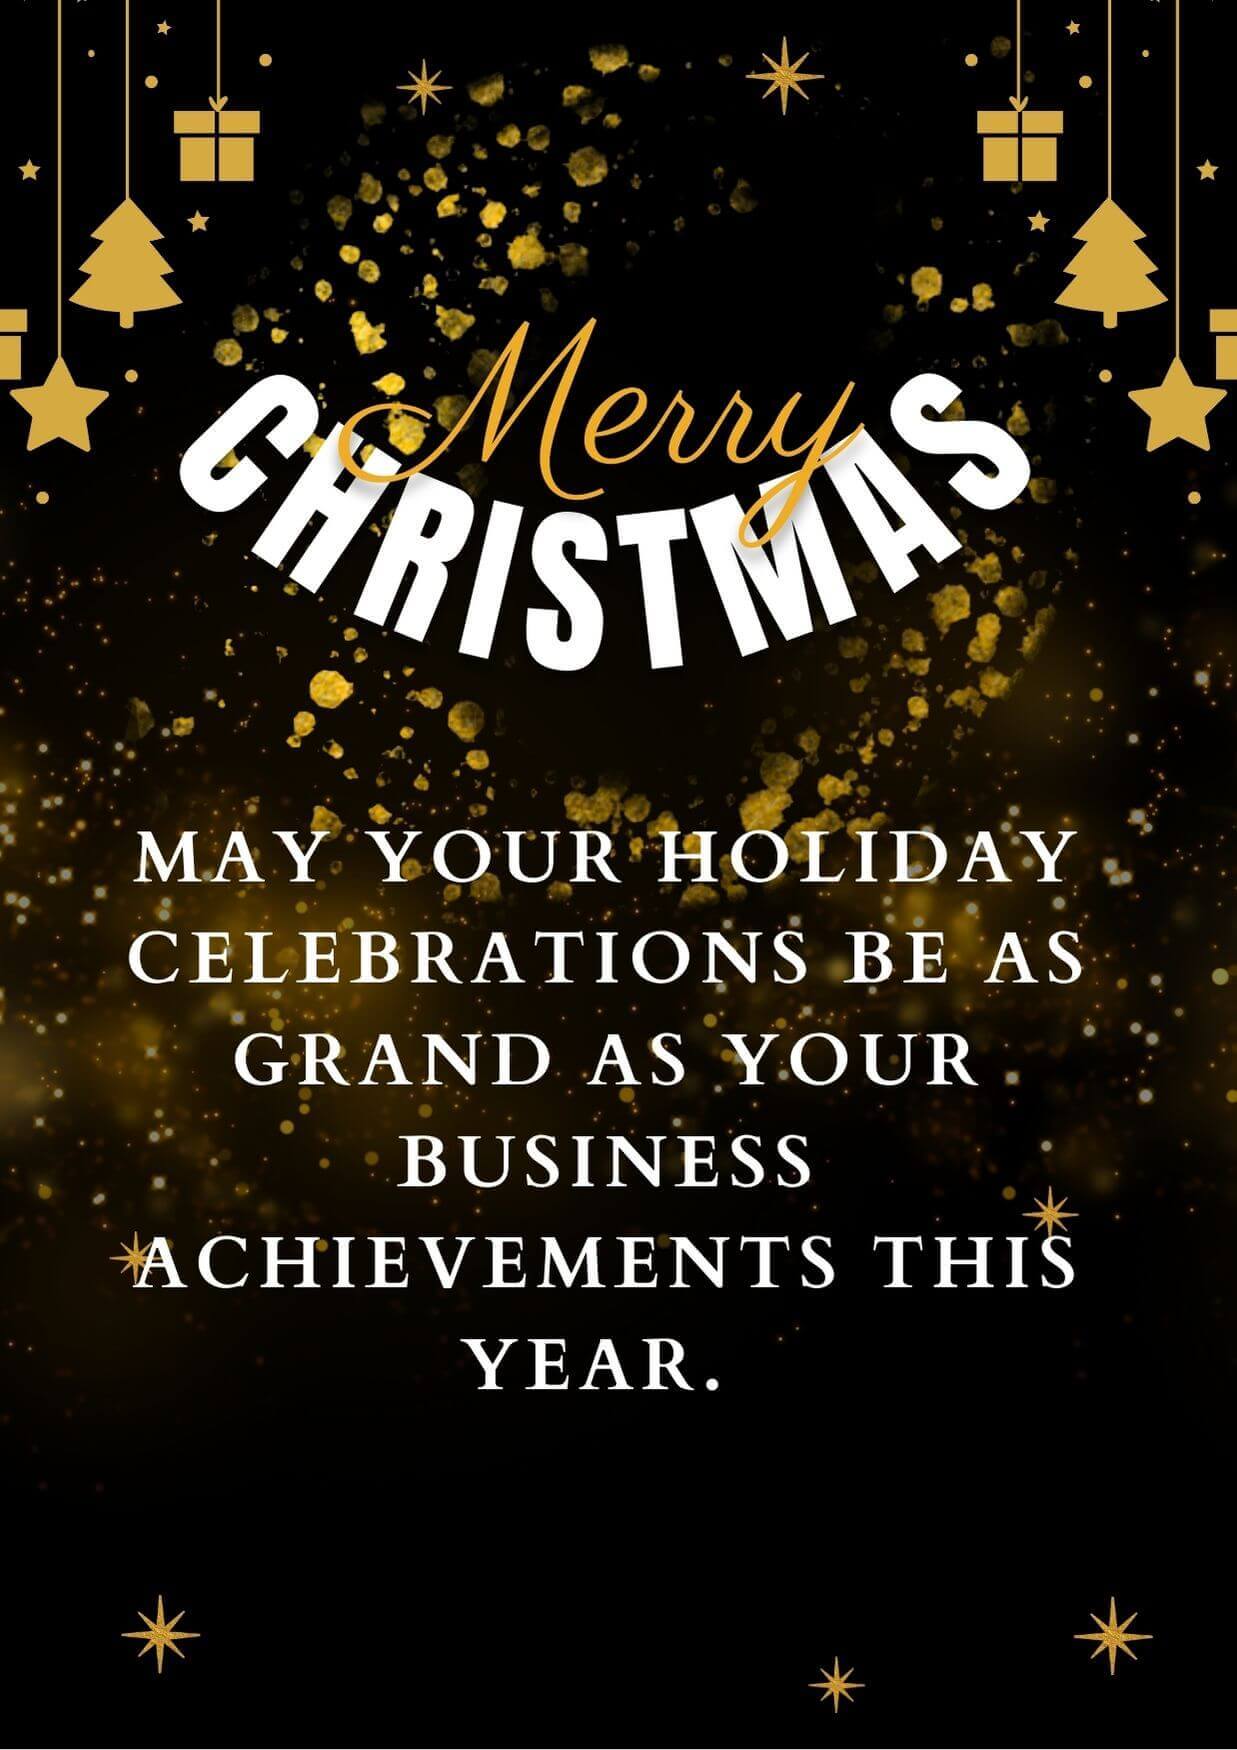 Merry Christmas Message For My Business Partners